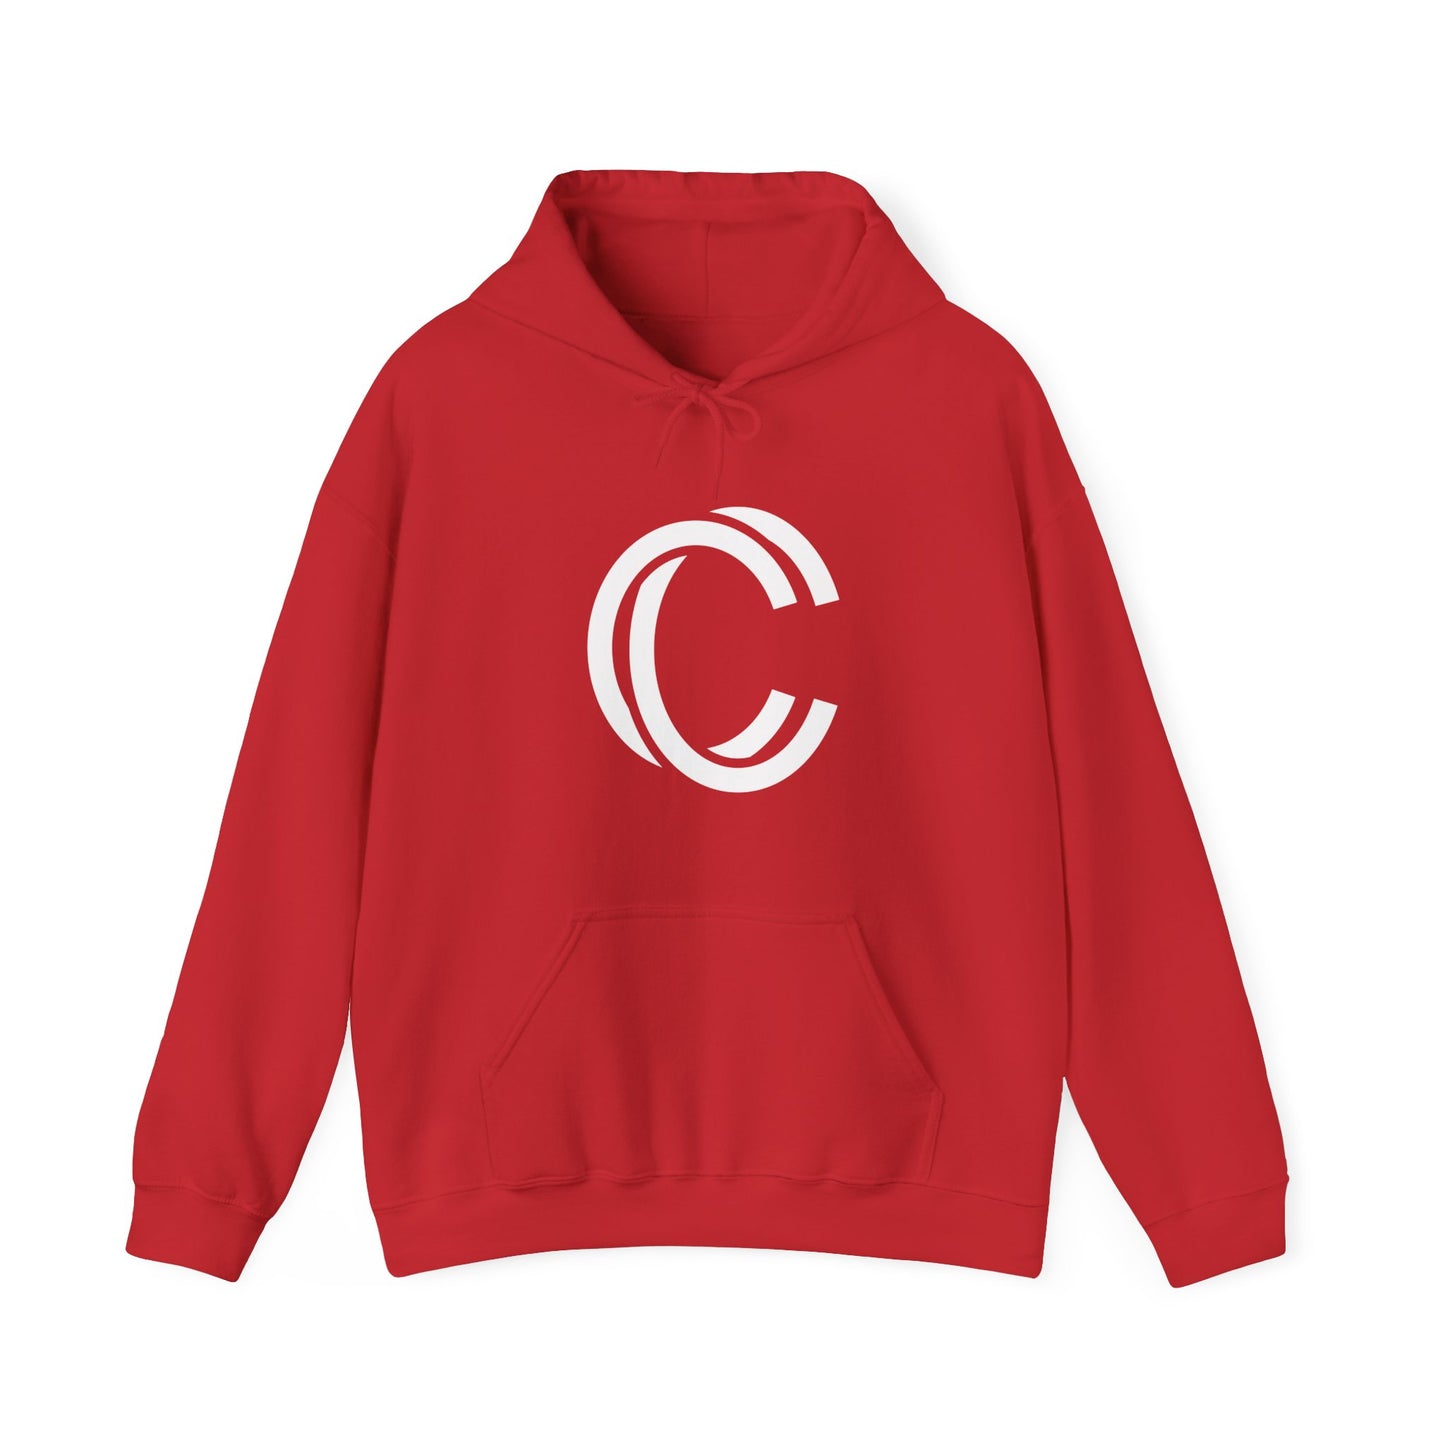 Carter Cantrell "CC" Hoodie